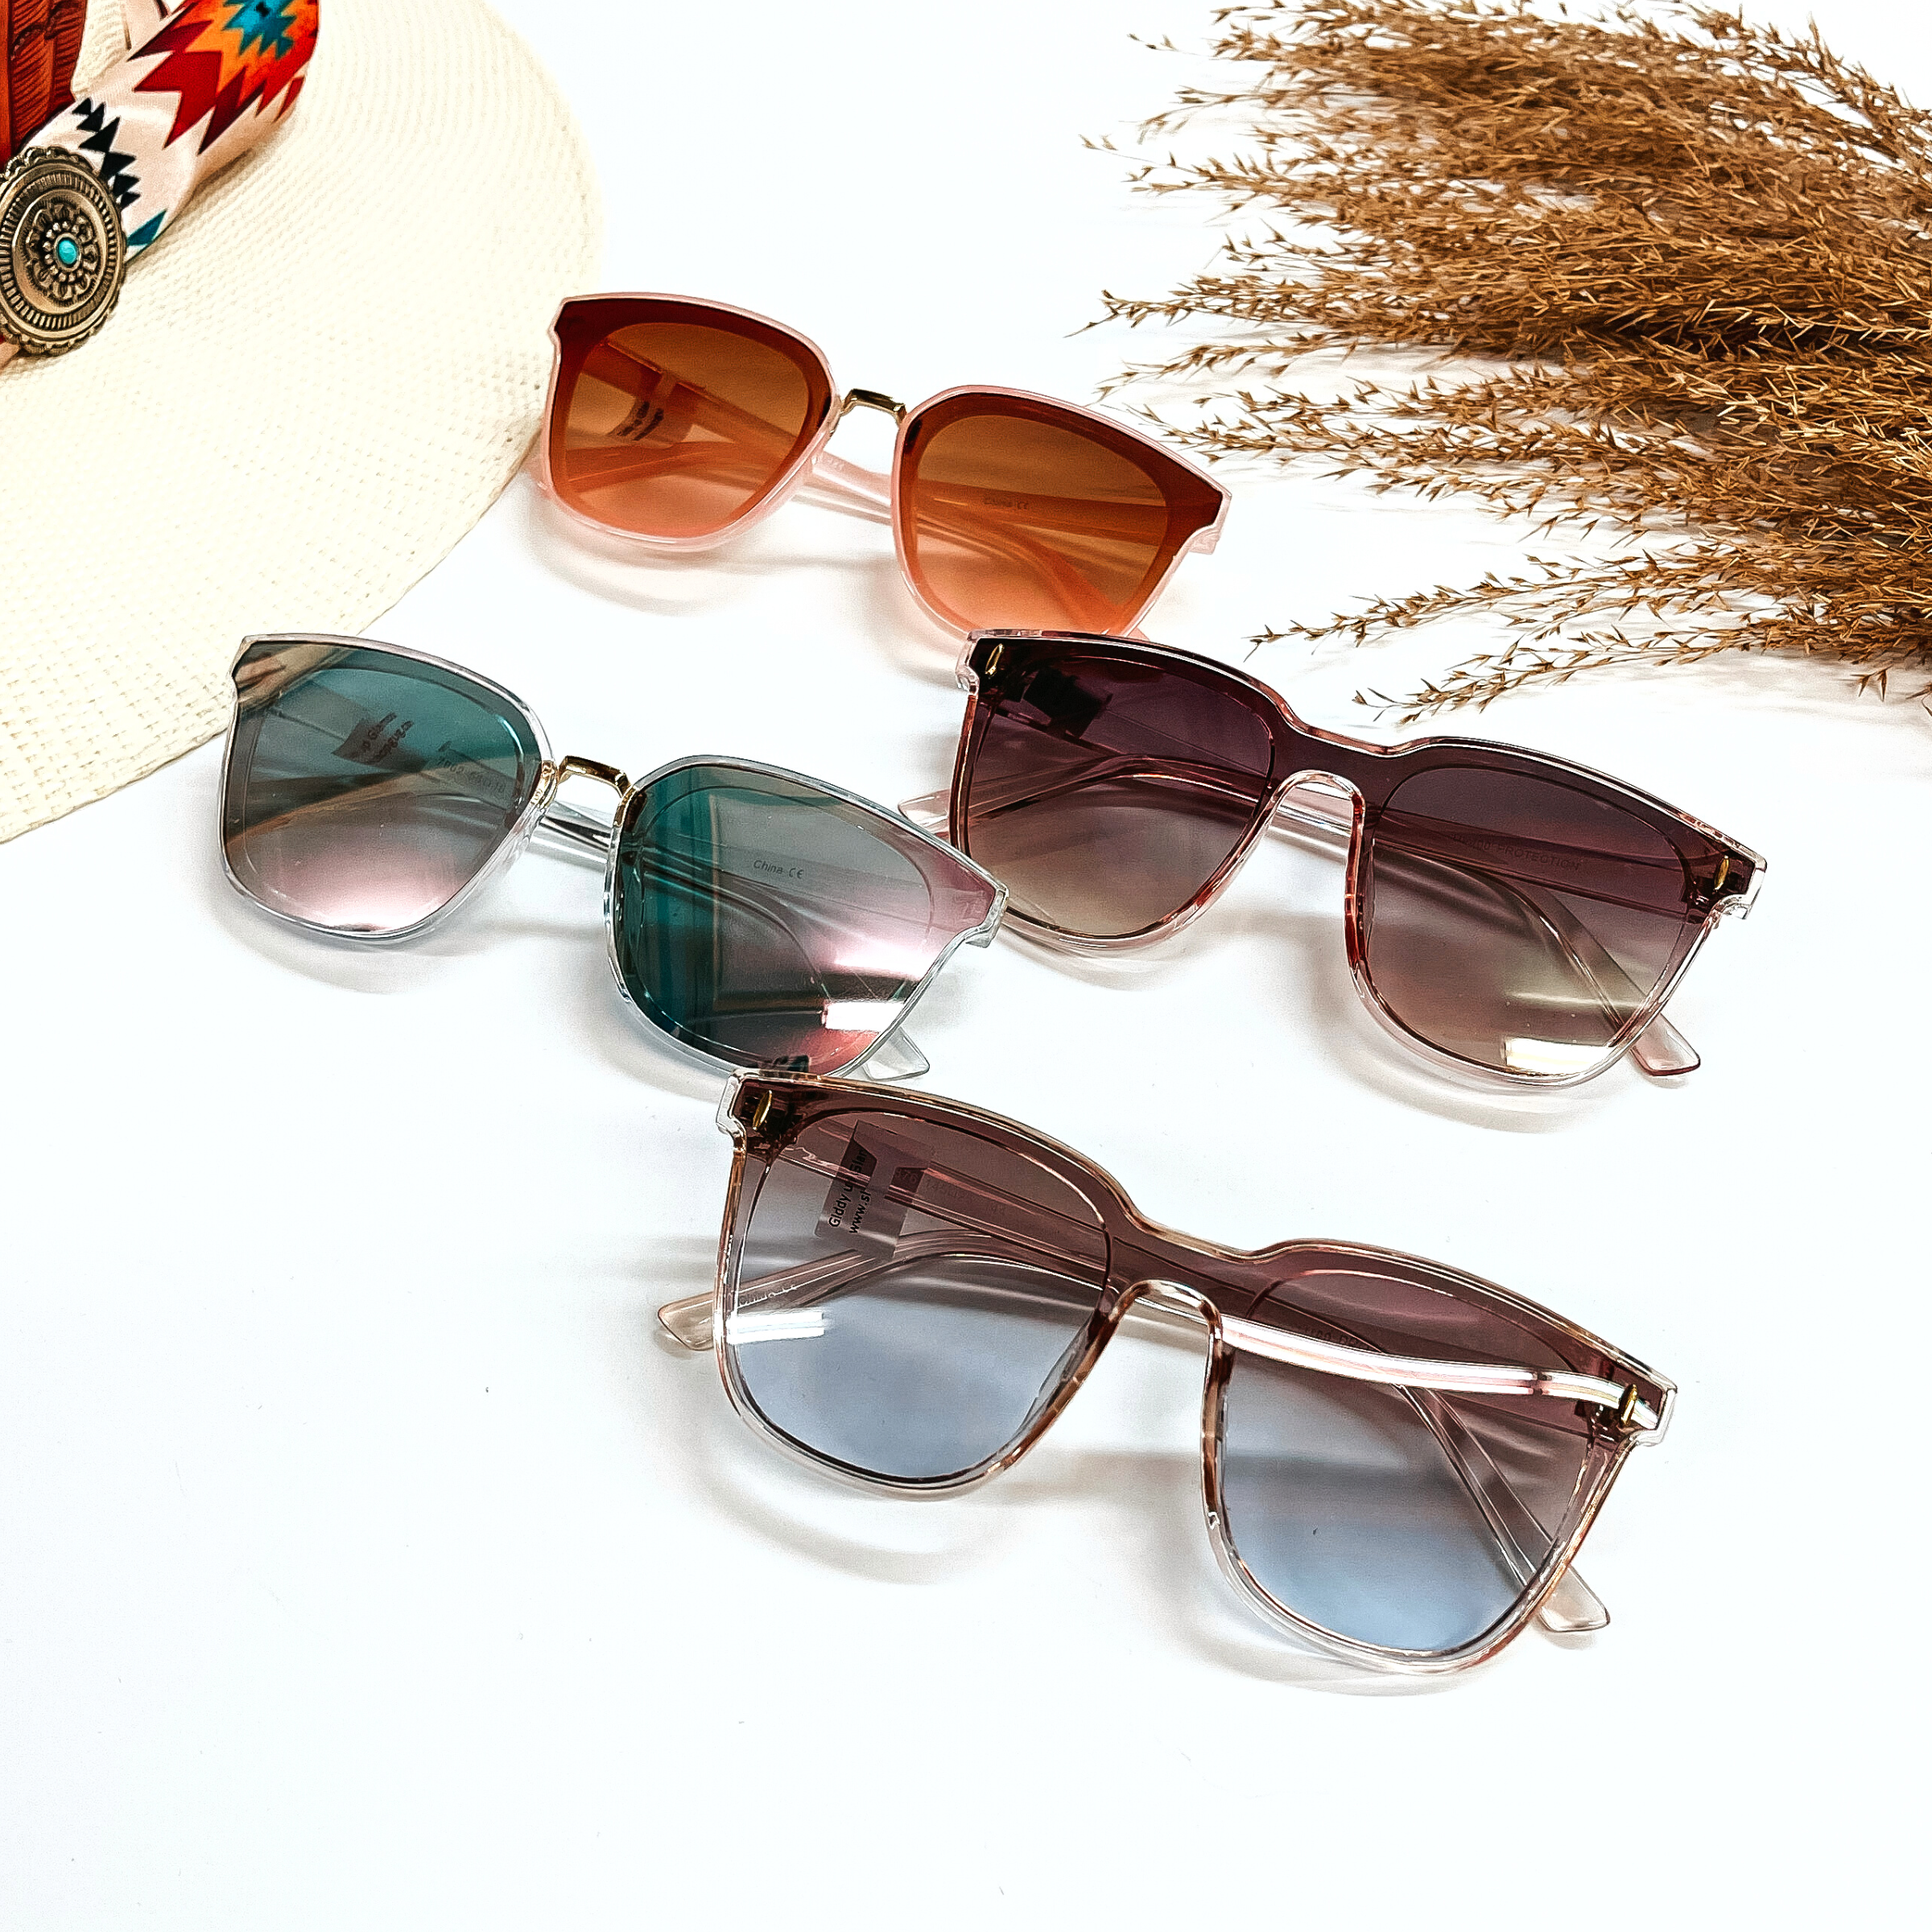 There are four pairs of wayfarer style sunglasses in different shades of pink/rose gold  frames and lenses. These pair of sunglasses are taken on a white background with a  straw hat and a colorful aztec print in the side, and a brown plant as decor.